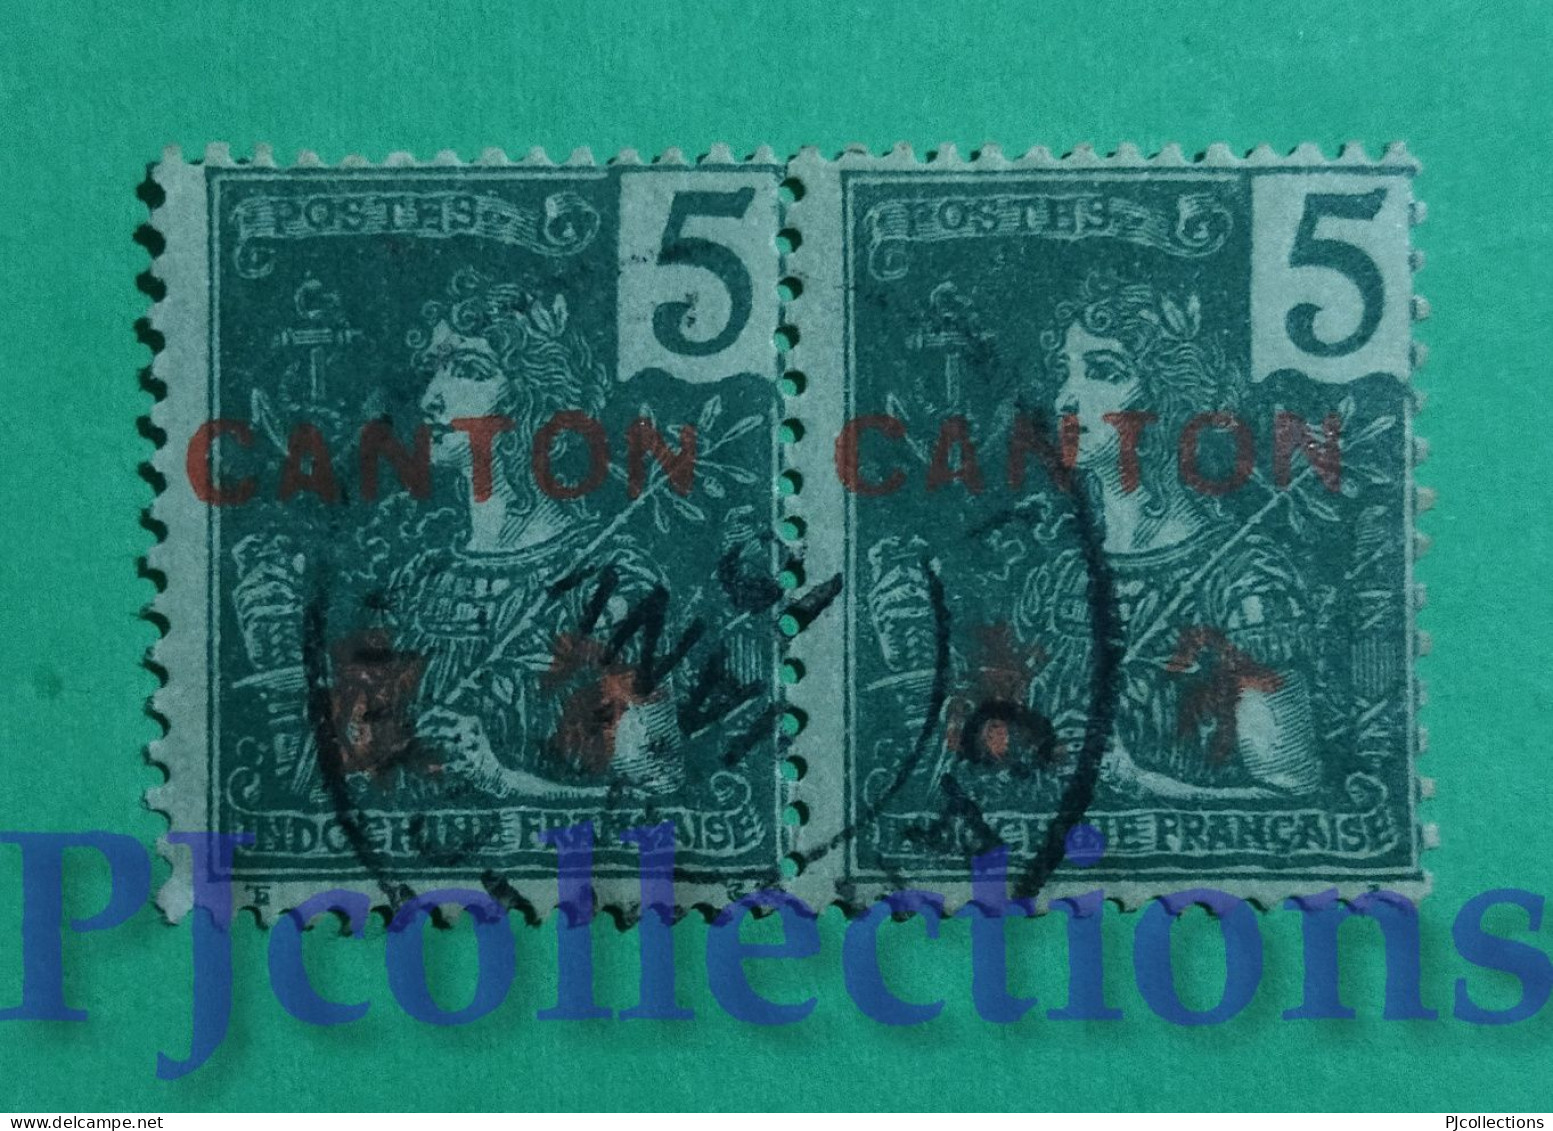 S786- FRENCH INDOCHINA CANTON 1907 OVERPRINTED 5c IN COPPIA - COUPLE USATI - USED - Usados